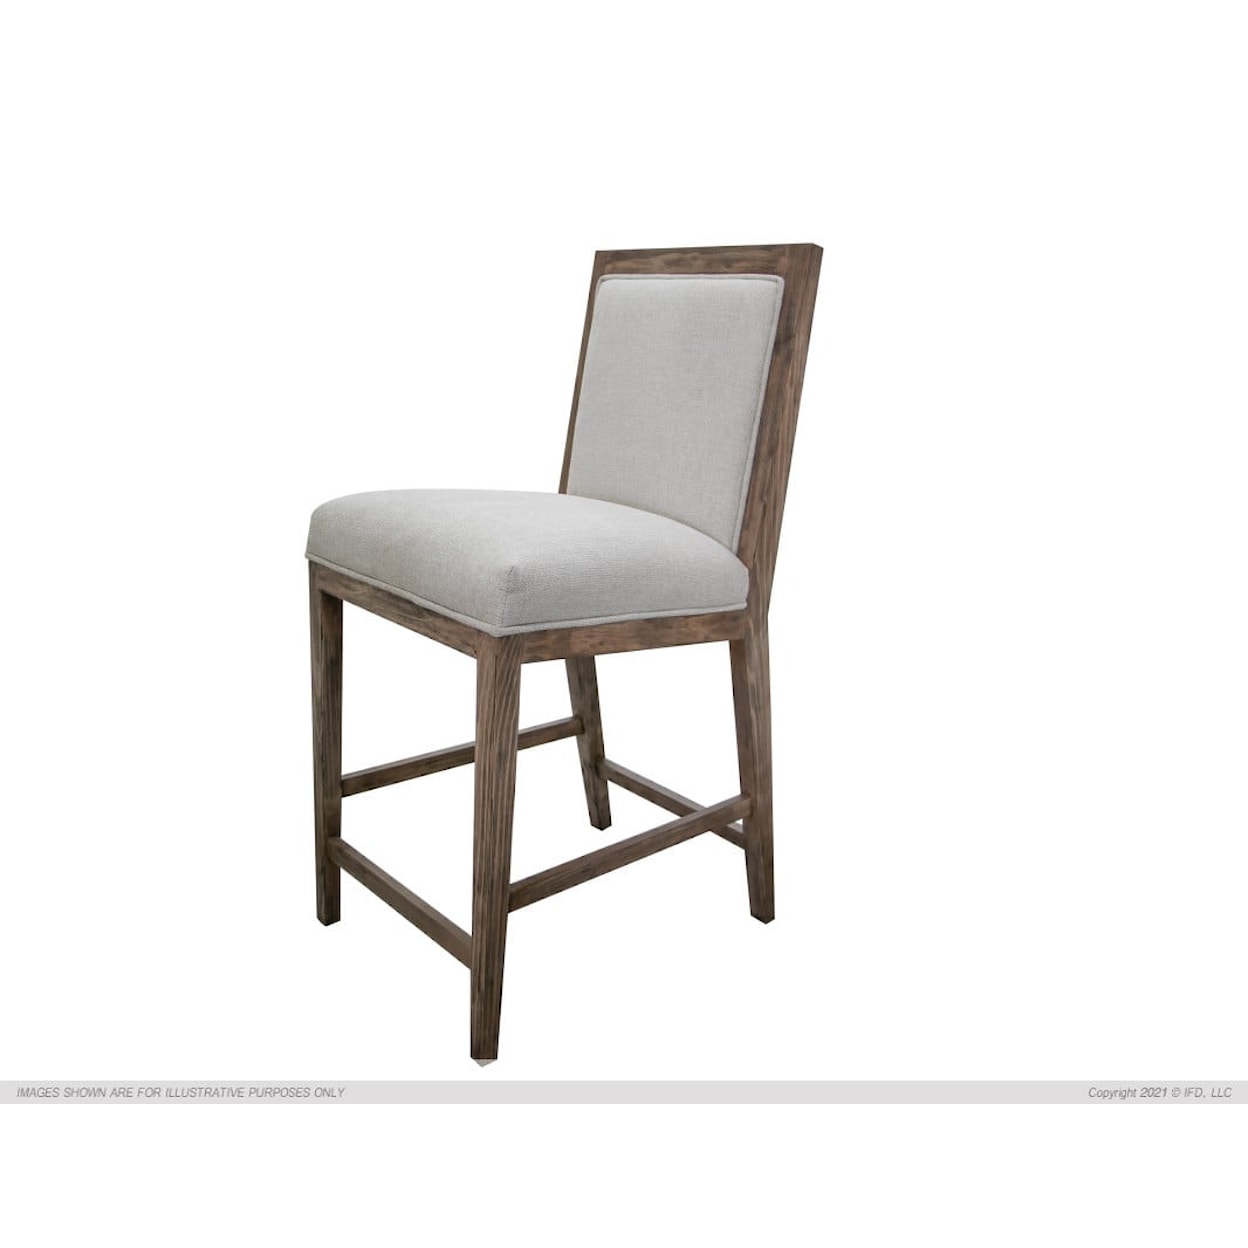 VFM Signature SEATING COLLECTION Upholstered Barstool